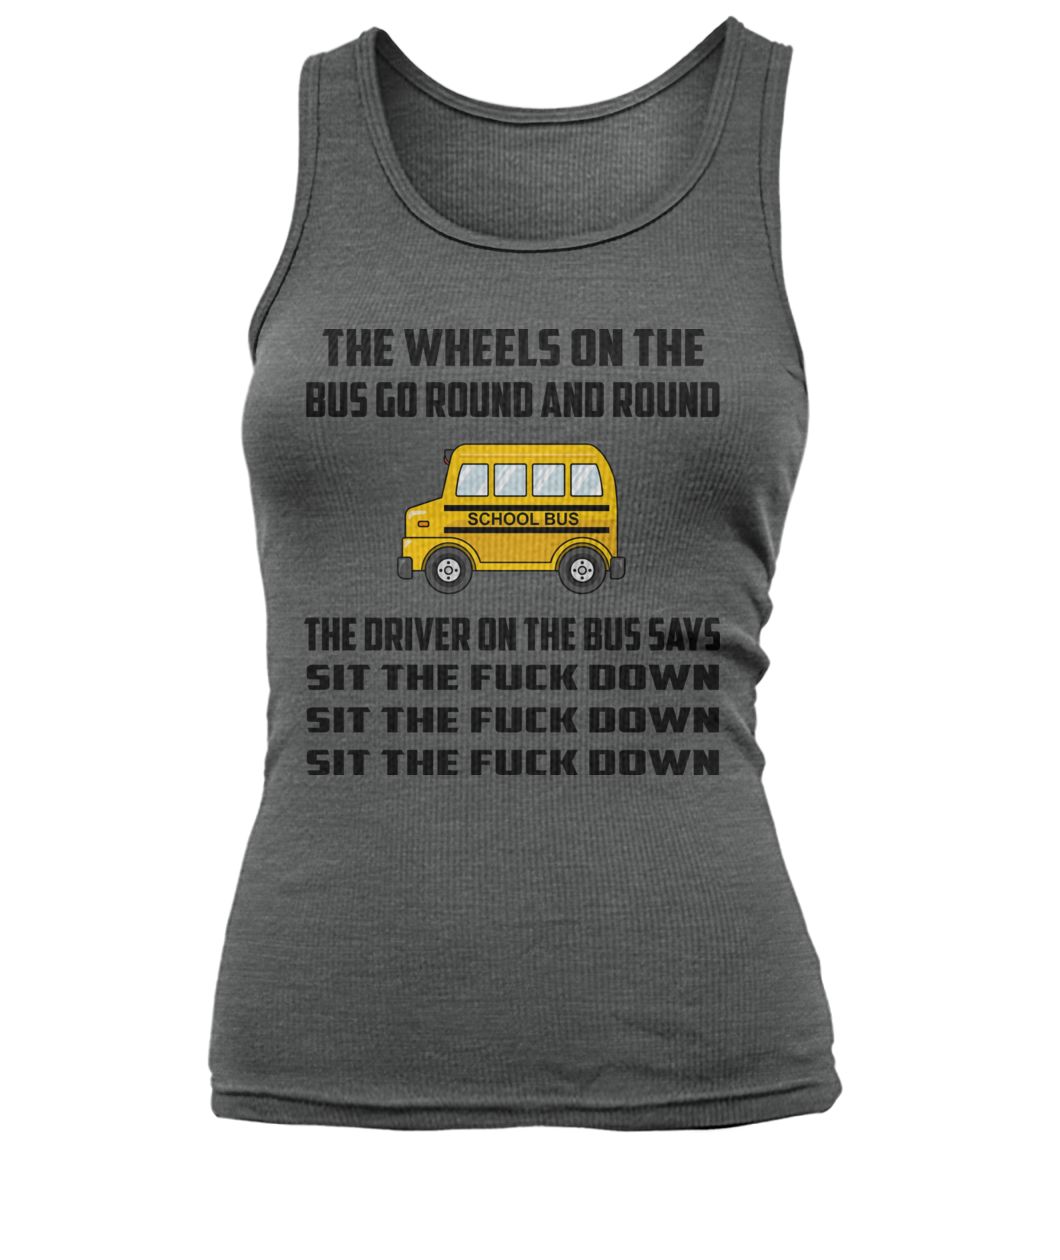 School bus the wheels on the bus go round and round women's tank top